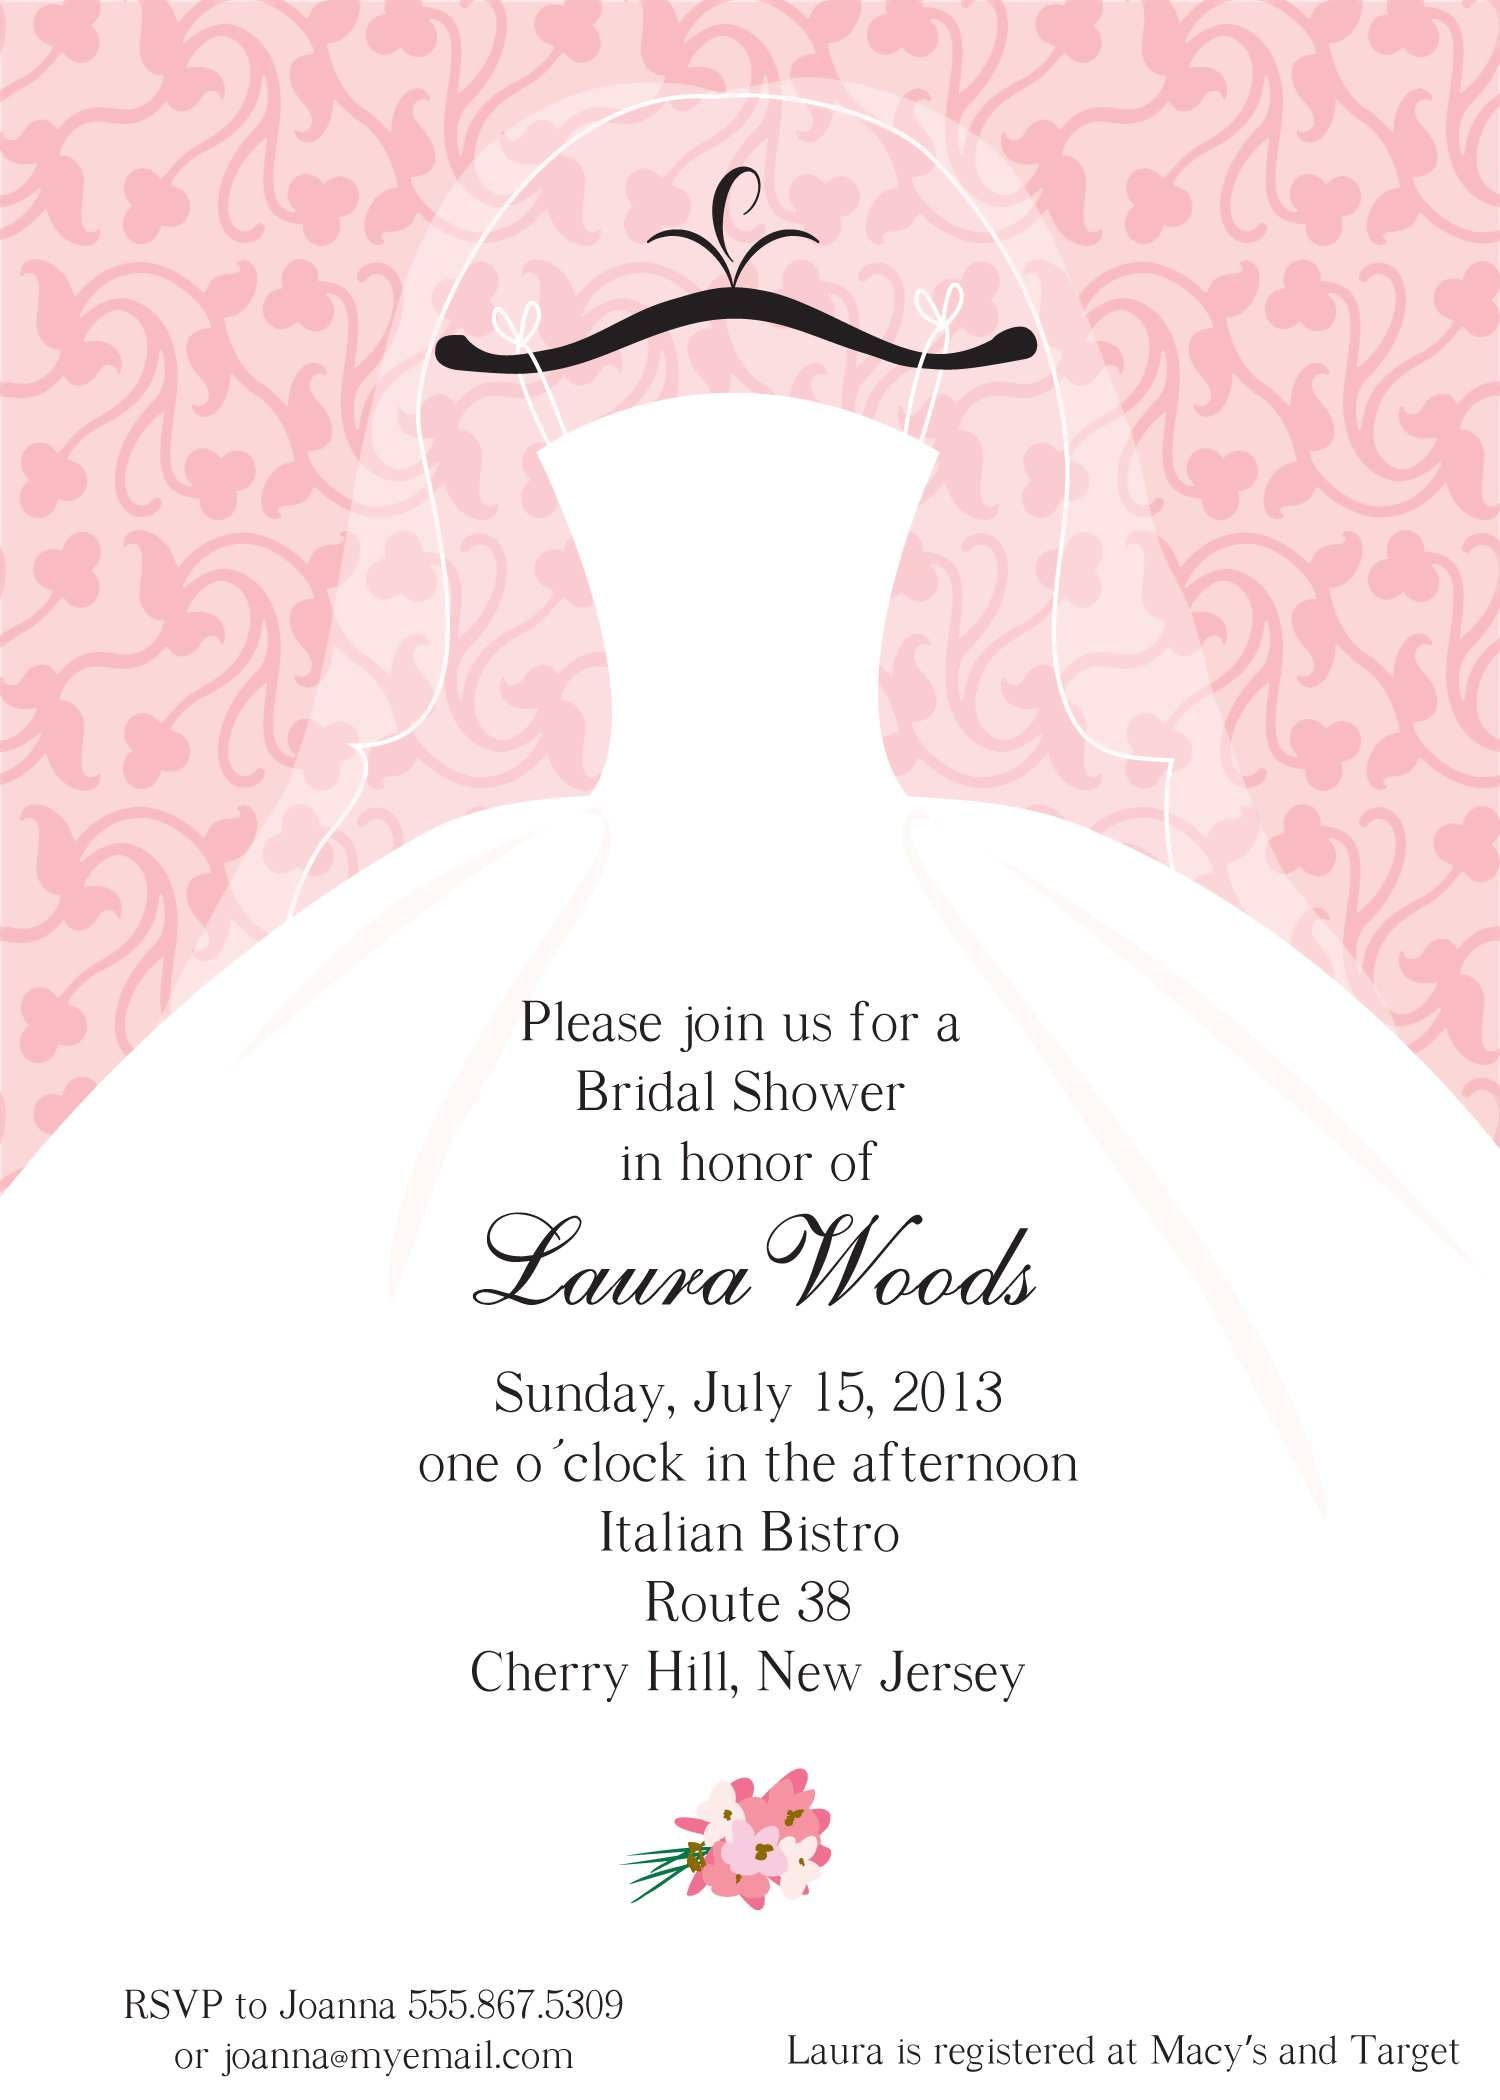 Bridal Shower Invitations Templates Microsoft Word – Forza With Regard To Blank Bridal Shower Invitations Templates